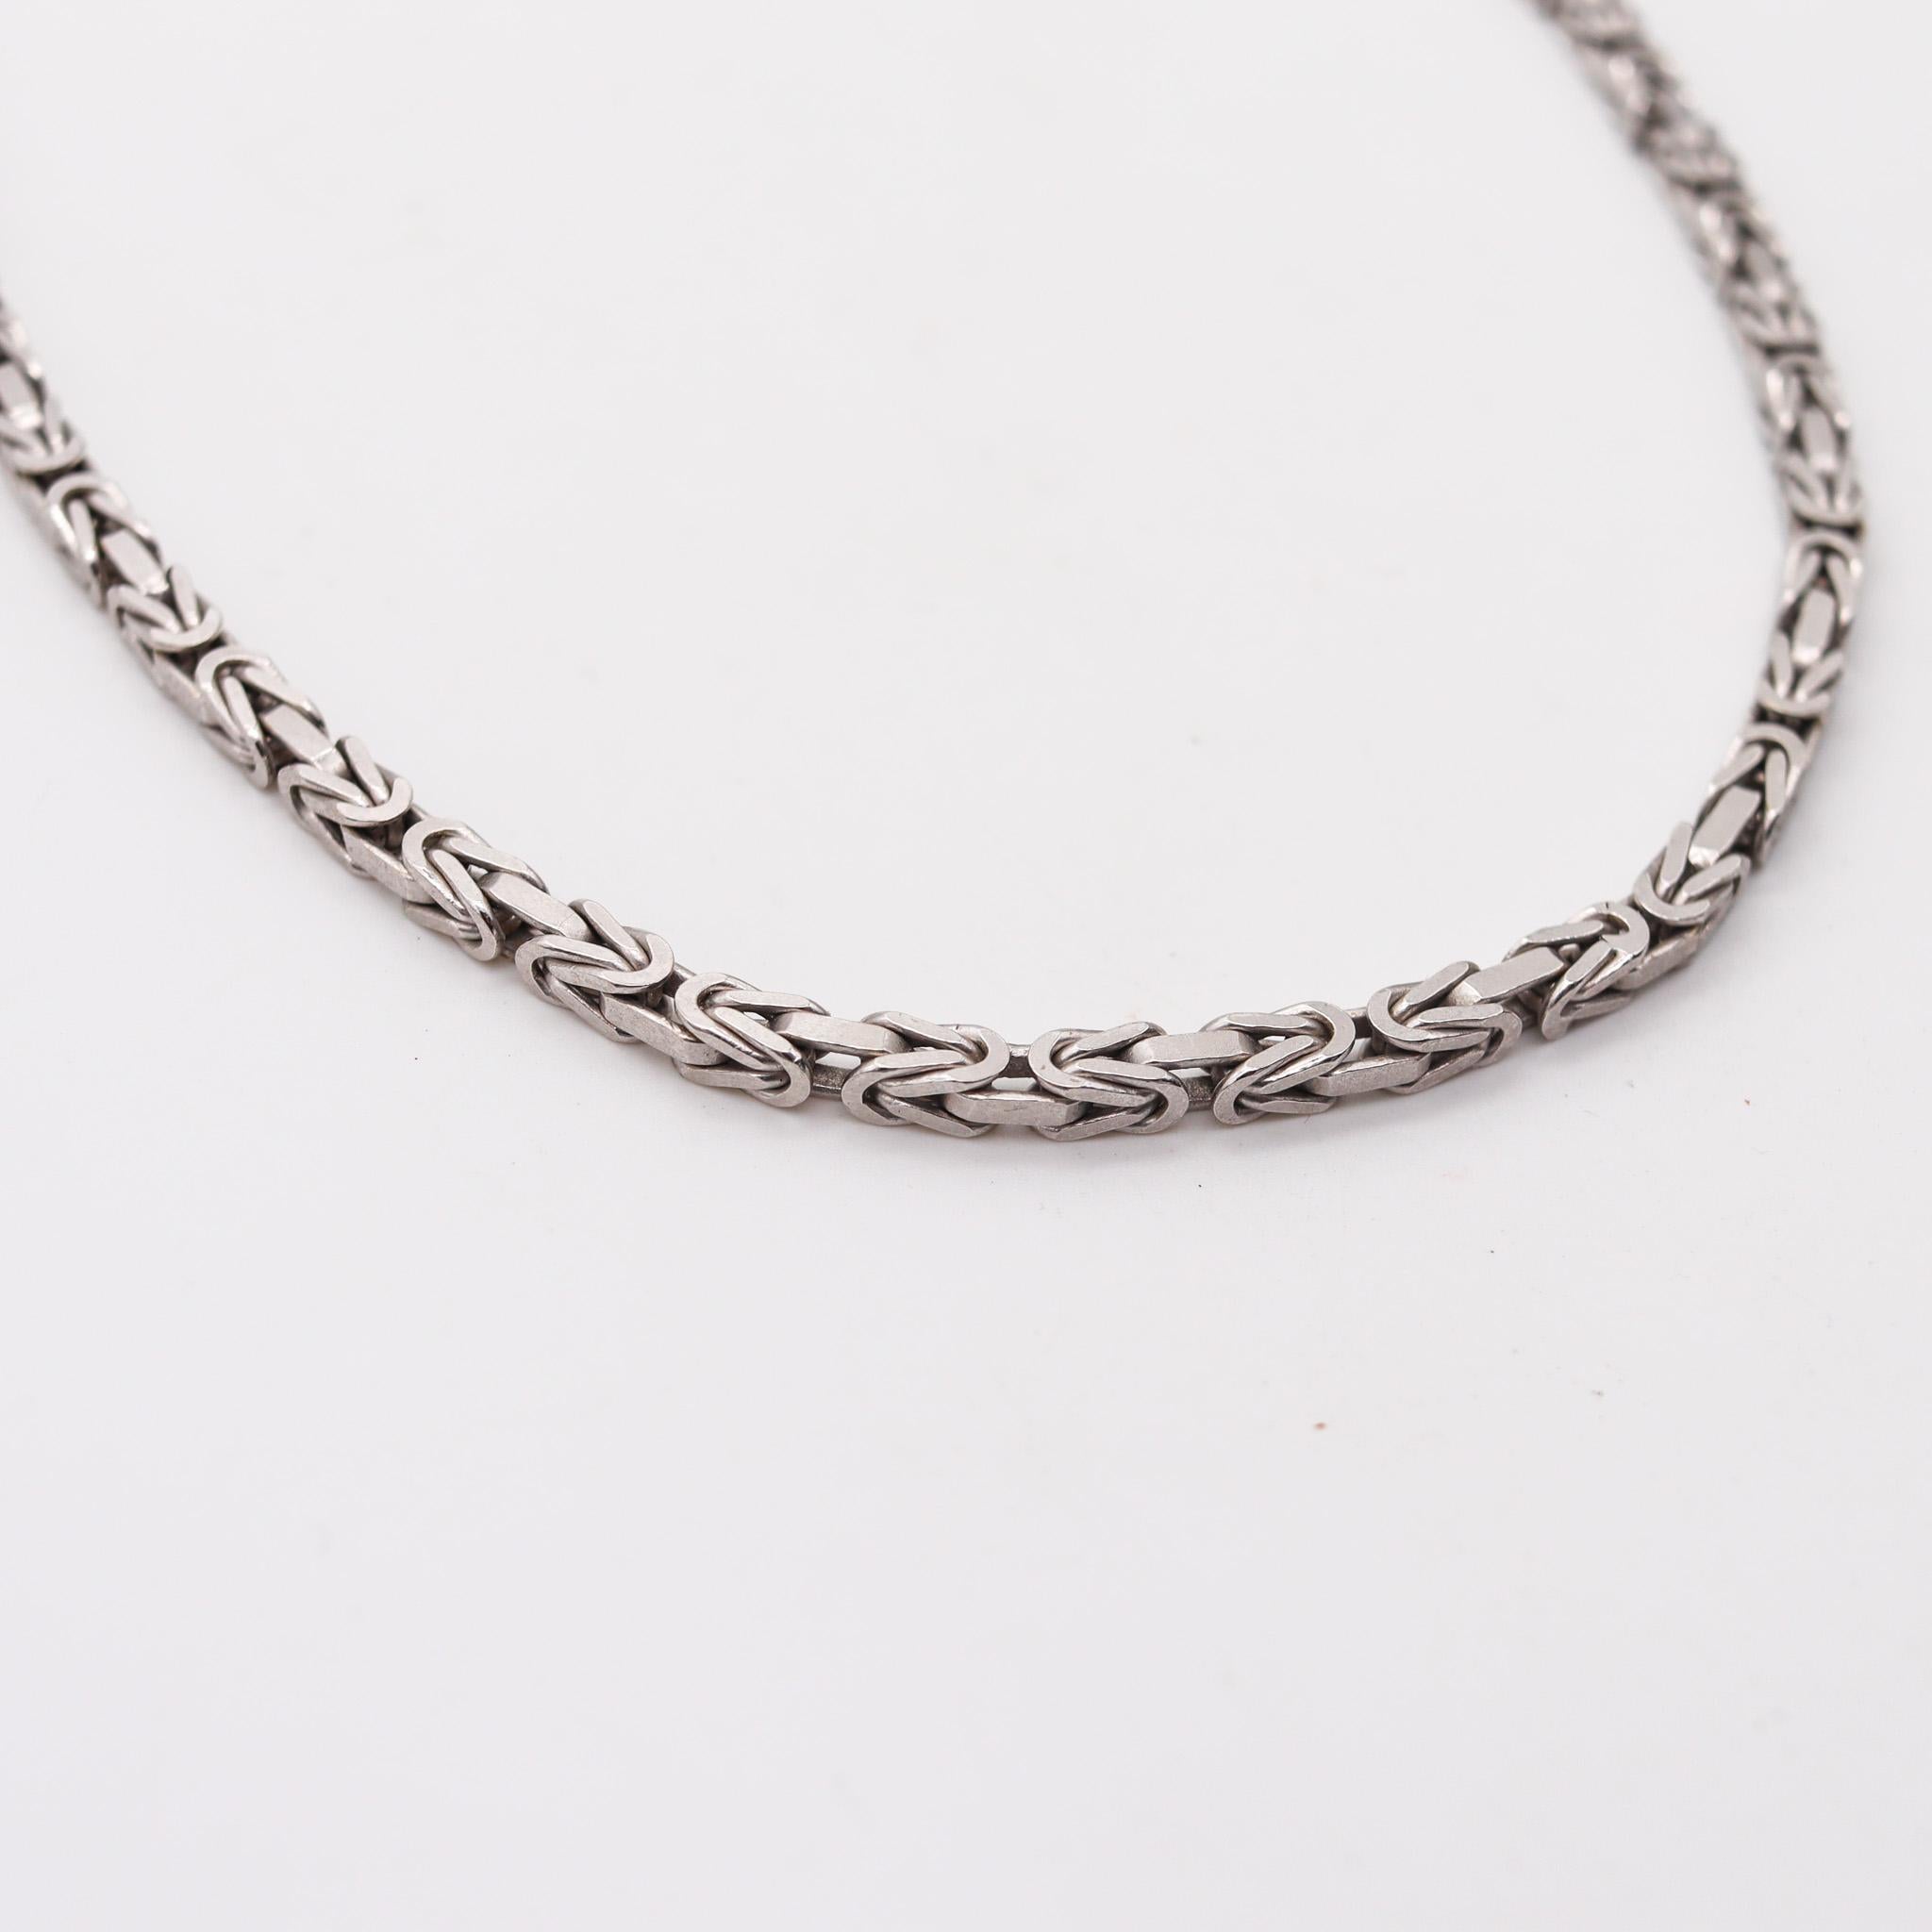 An Italian Byzantine links chain necklace in white gold.

Beautiful solid and bold chain, created in Italy with Byzantines links. Crafted in solid white gold of 18 karats with high polished and rhodium finish. Fitted with a customized lobster